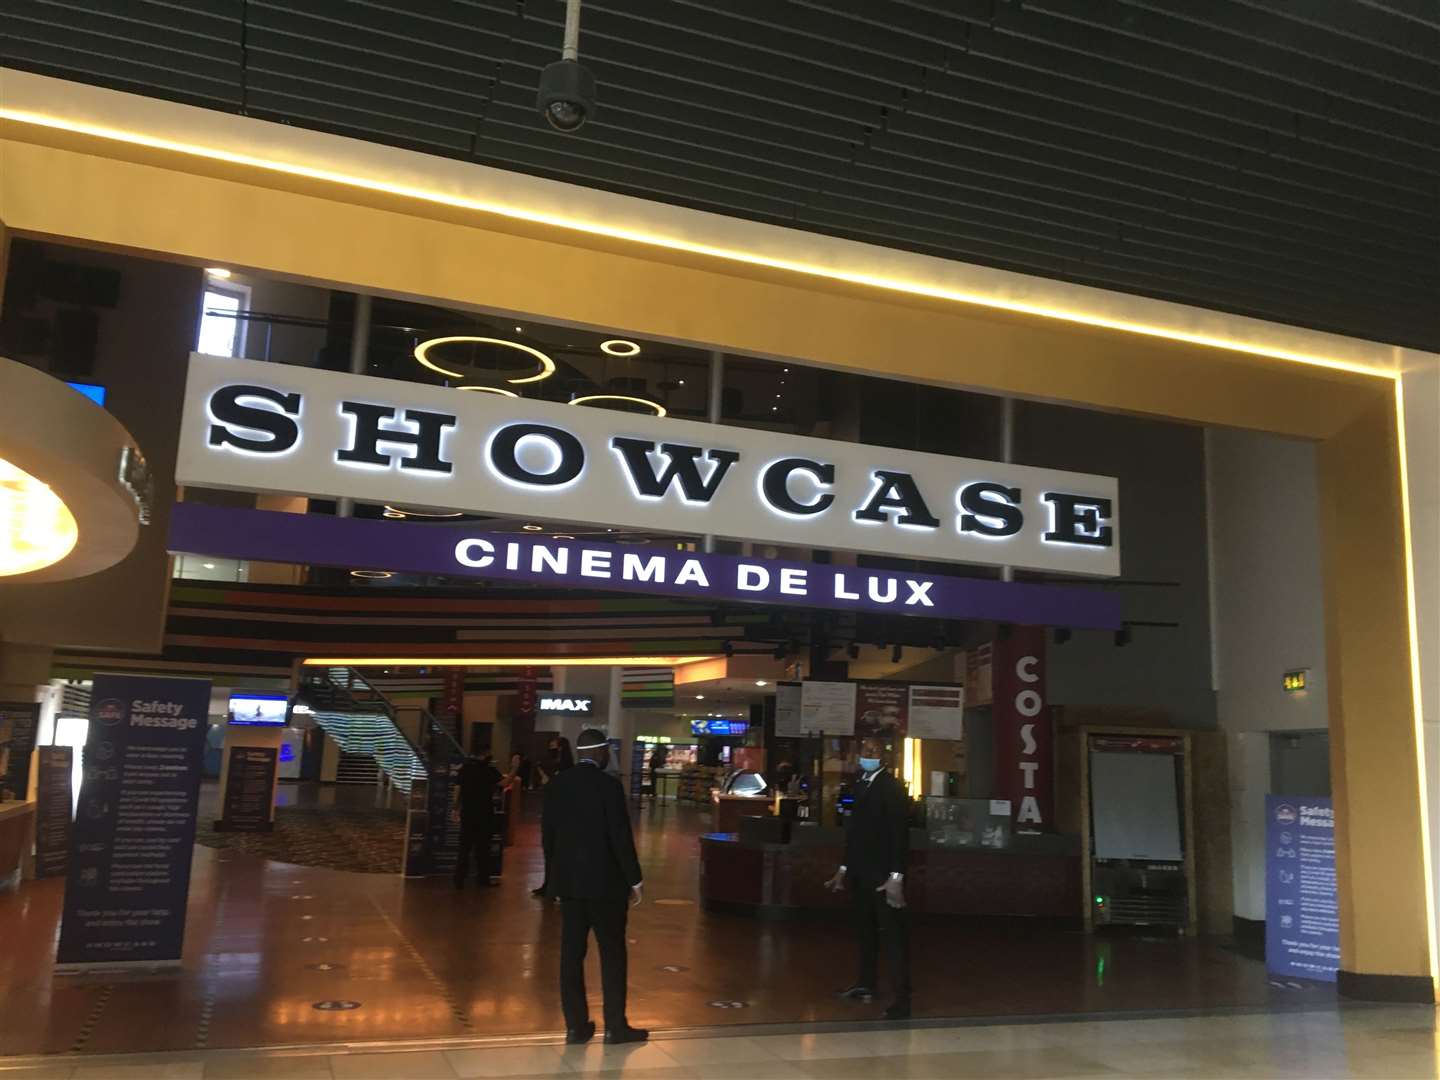 The cinema will remain open throughout the work